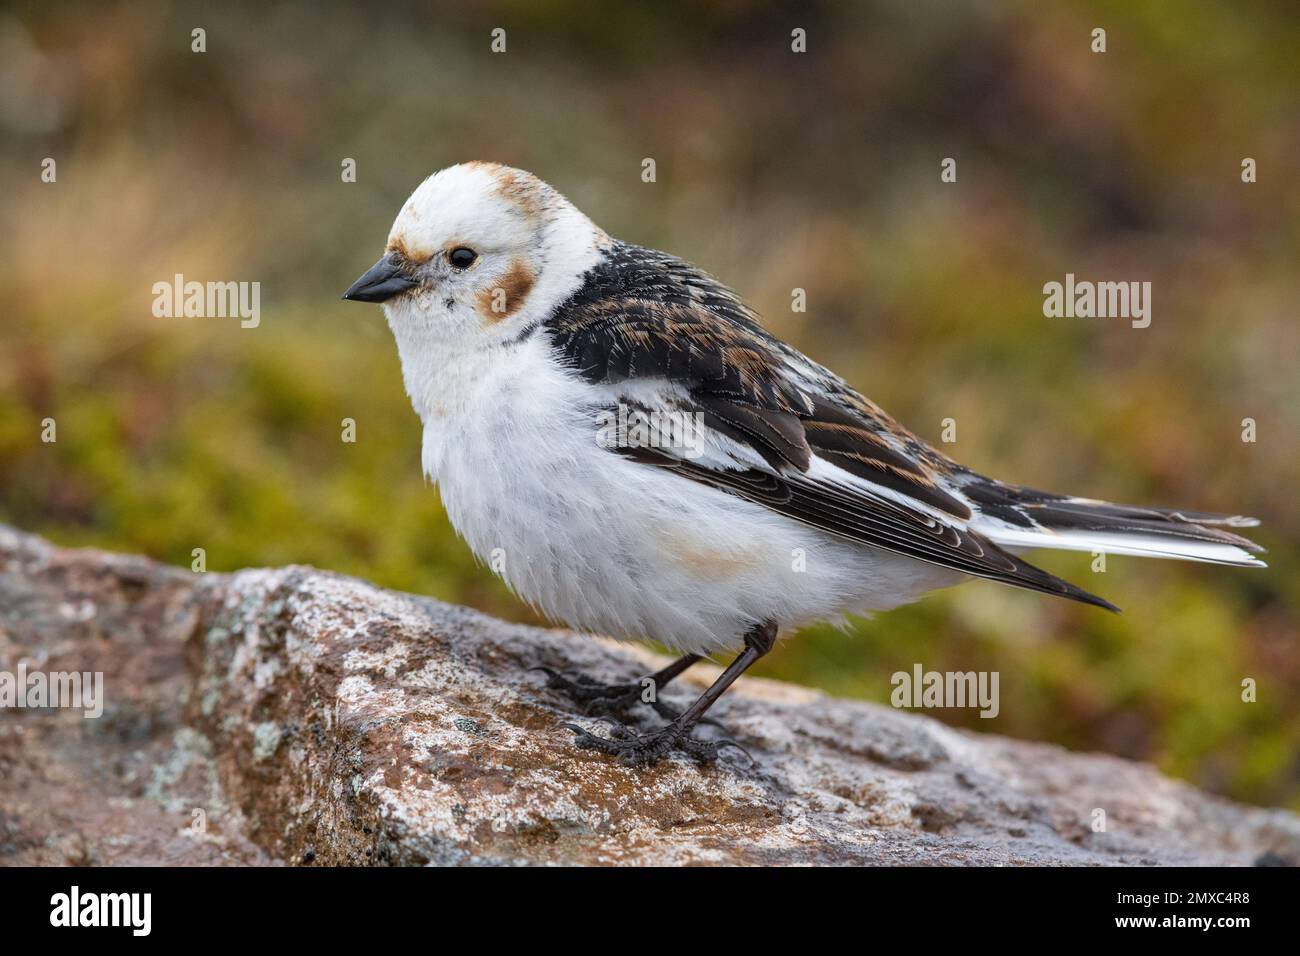 Snow Bunting (Plectrophenax nivalis insulae), side view of an adult male standing on a rock, Northeastern Region, Iceland Stock Photo